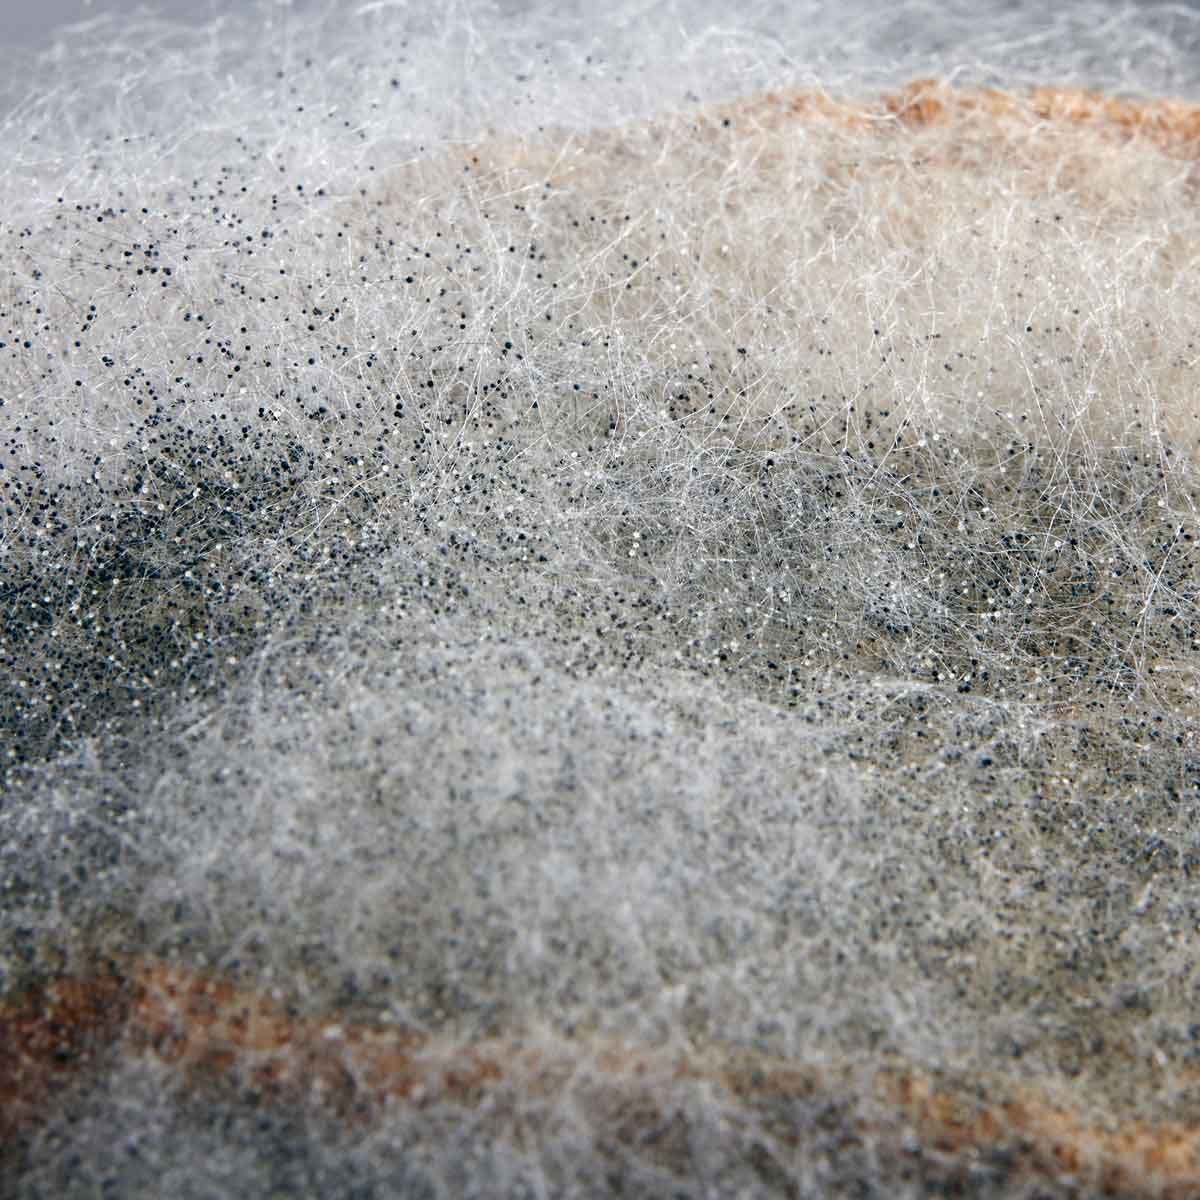 How Does Bread Get Black Mold?  Is Eating Black Bread Mold harmful?